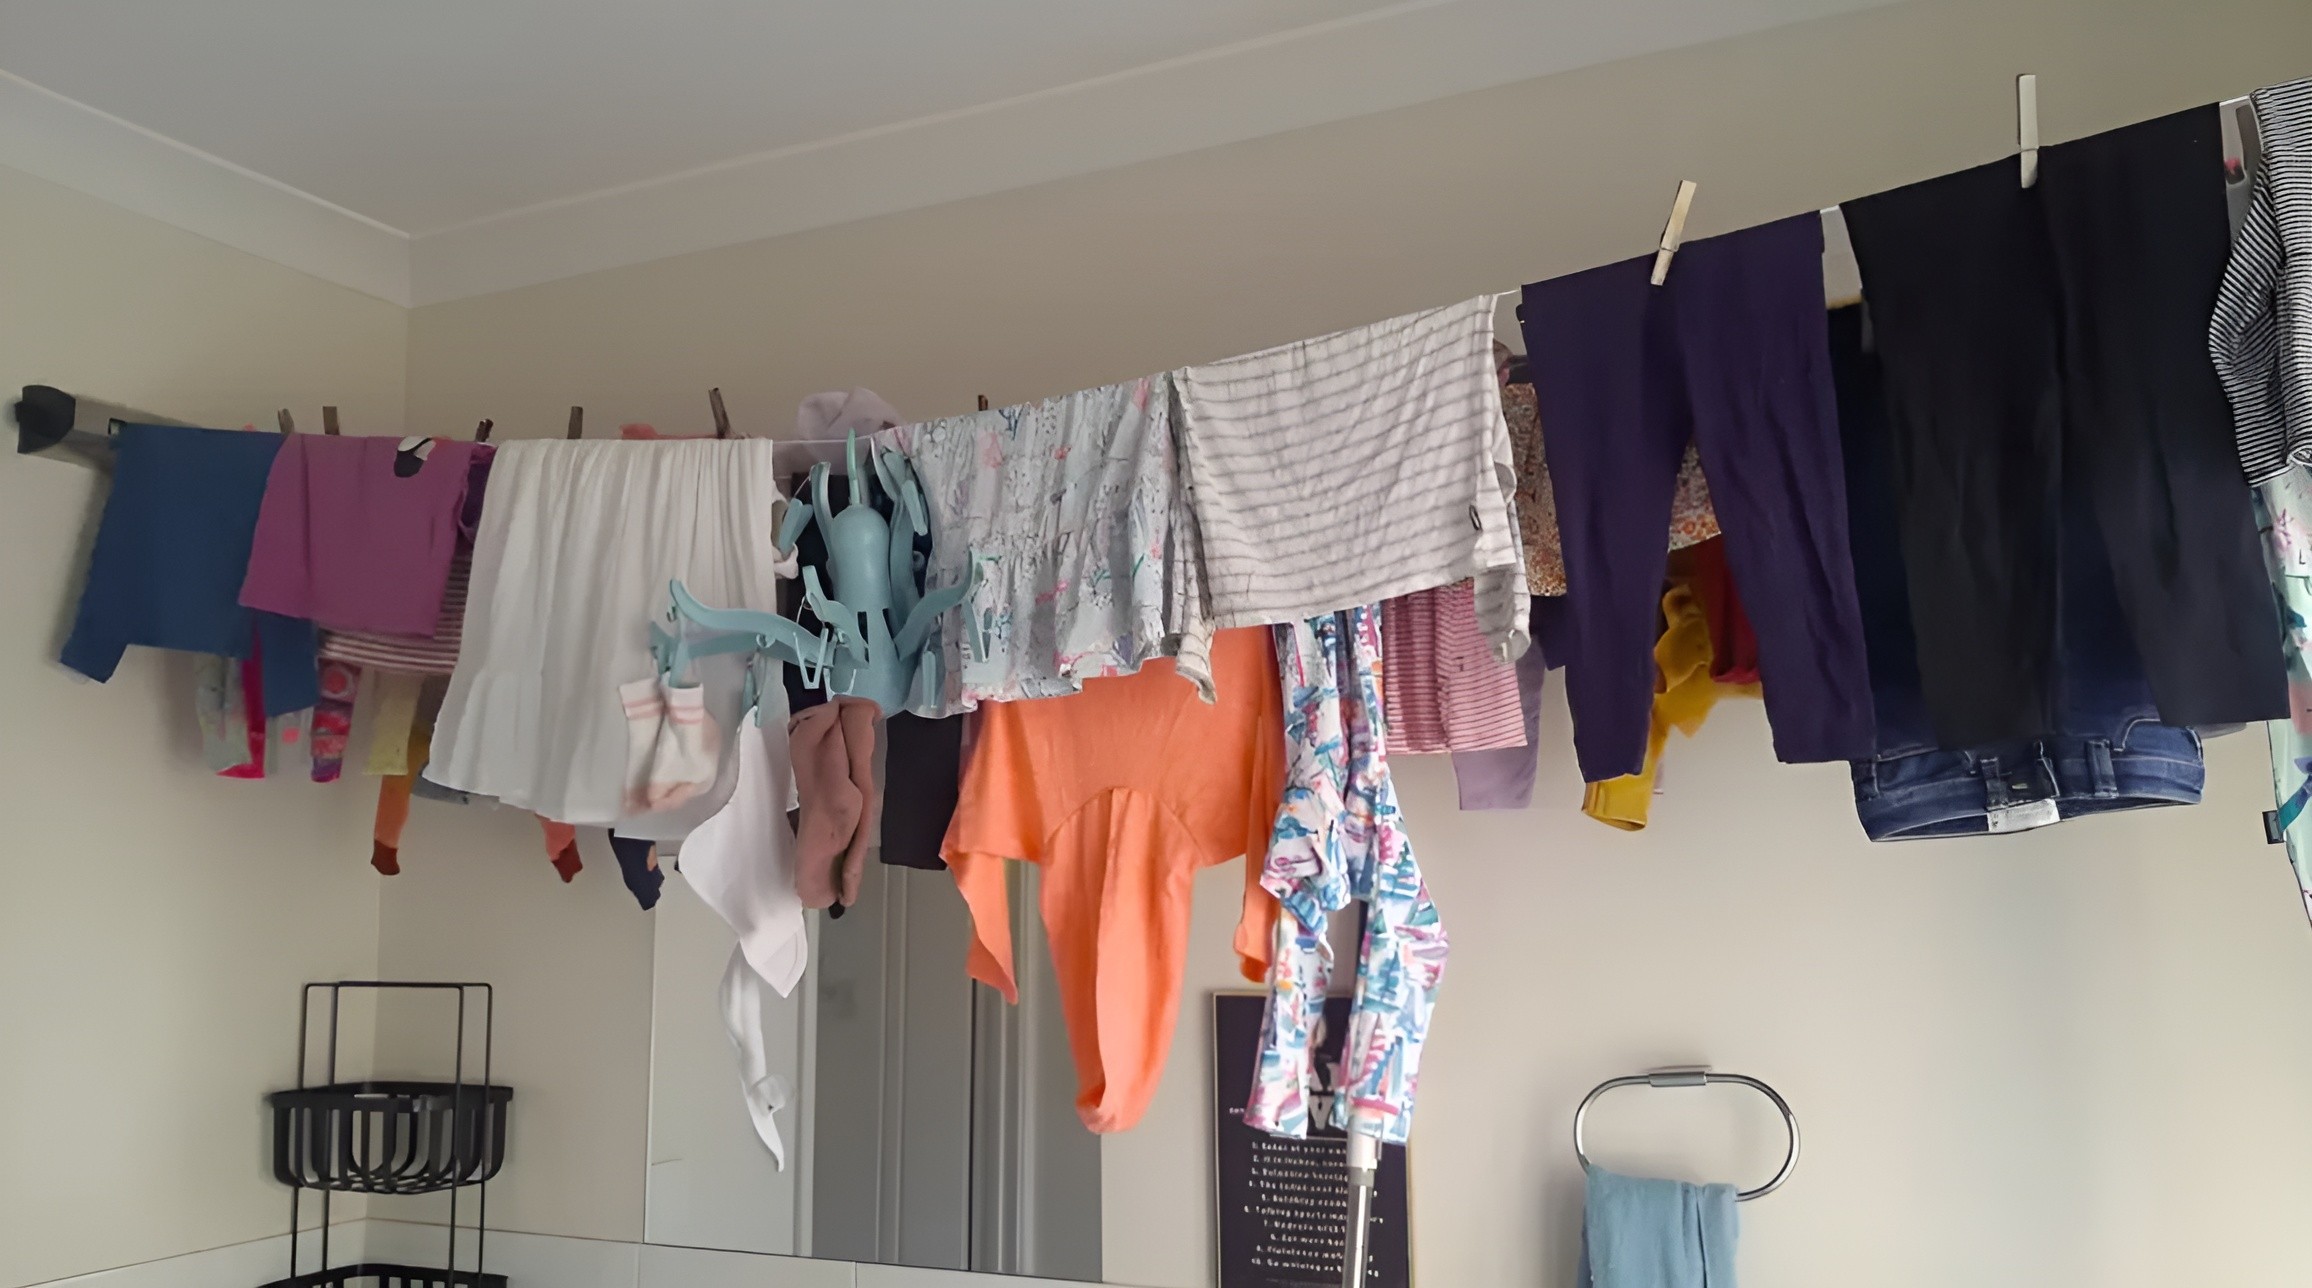 Wall to Wall Clothes Line Laundry Load Considerations